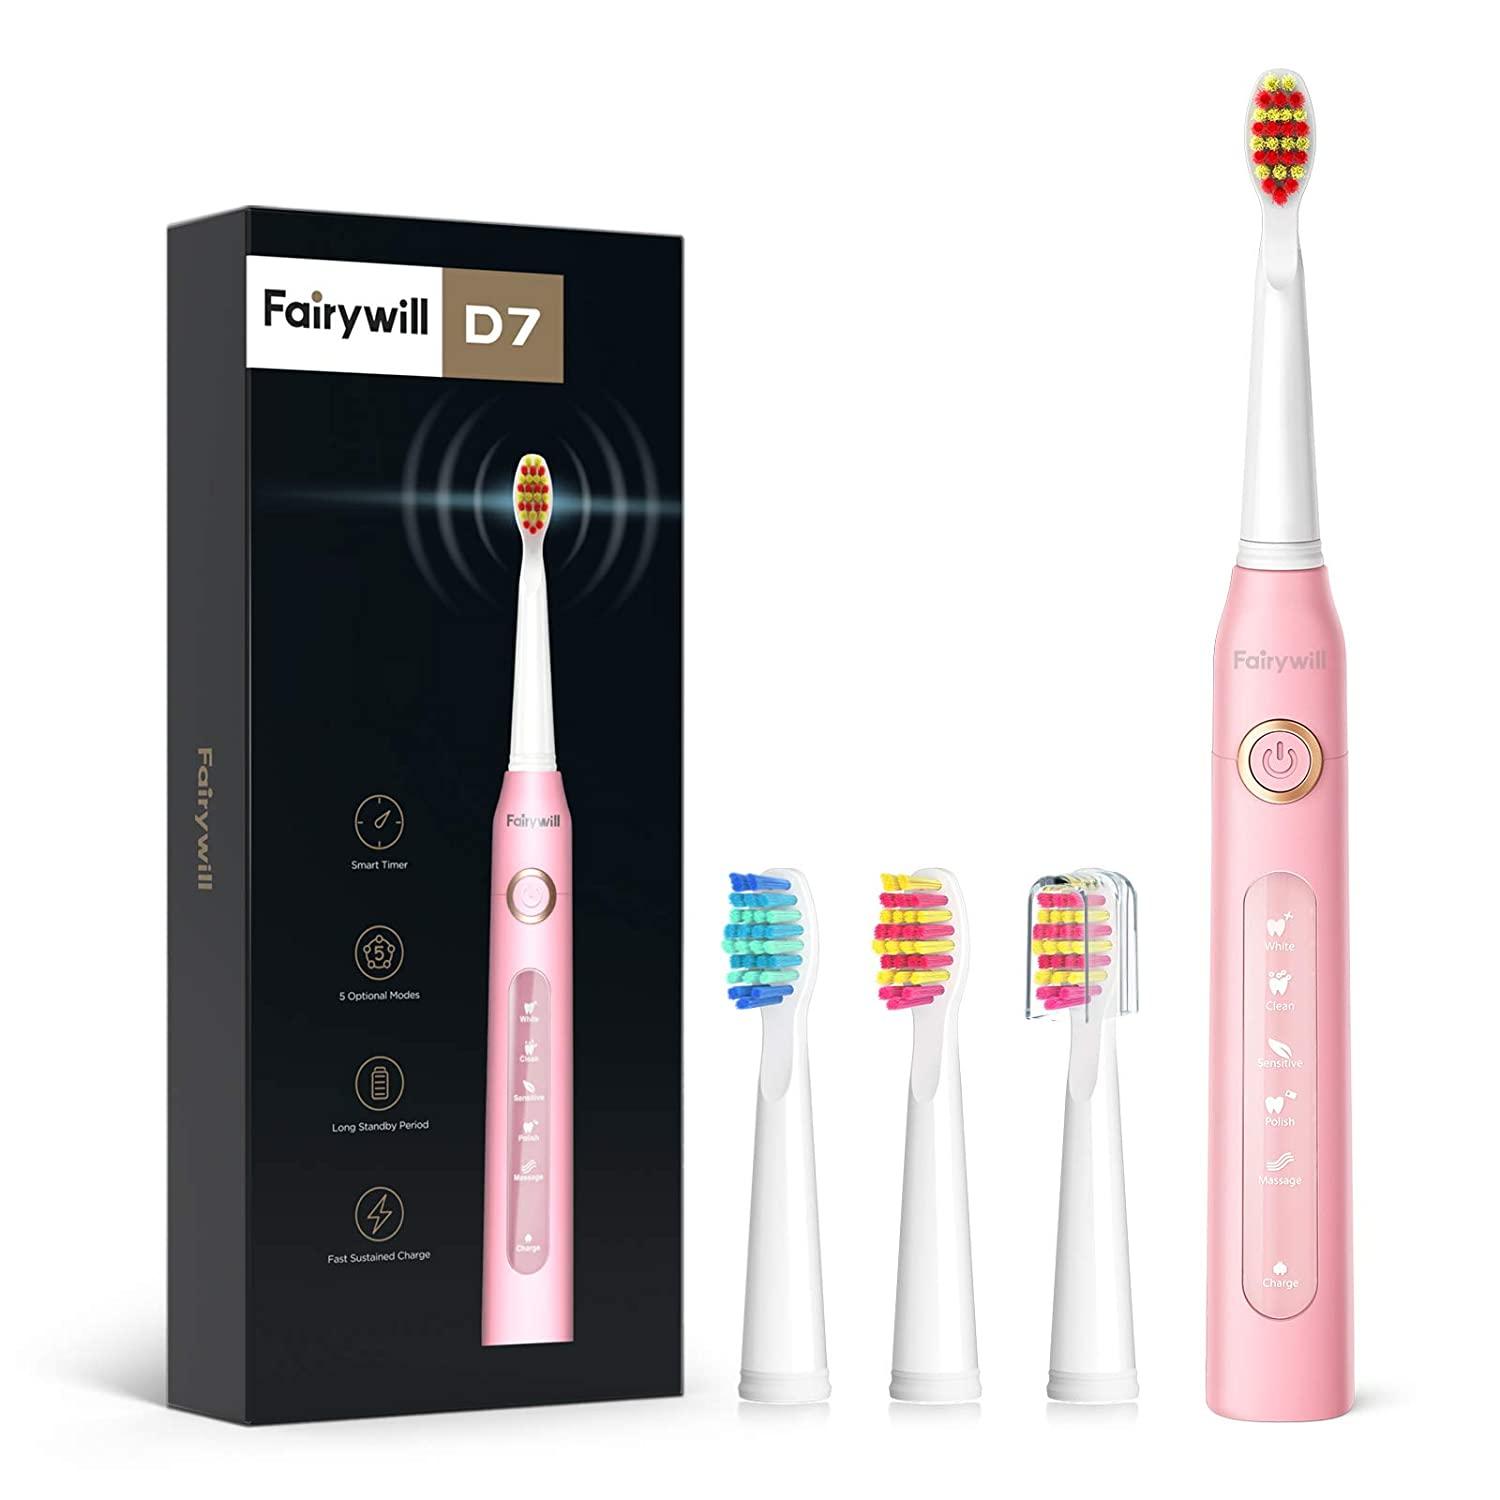 Fairywill UltraSonic Powered Electric Toothbrush for $19.95